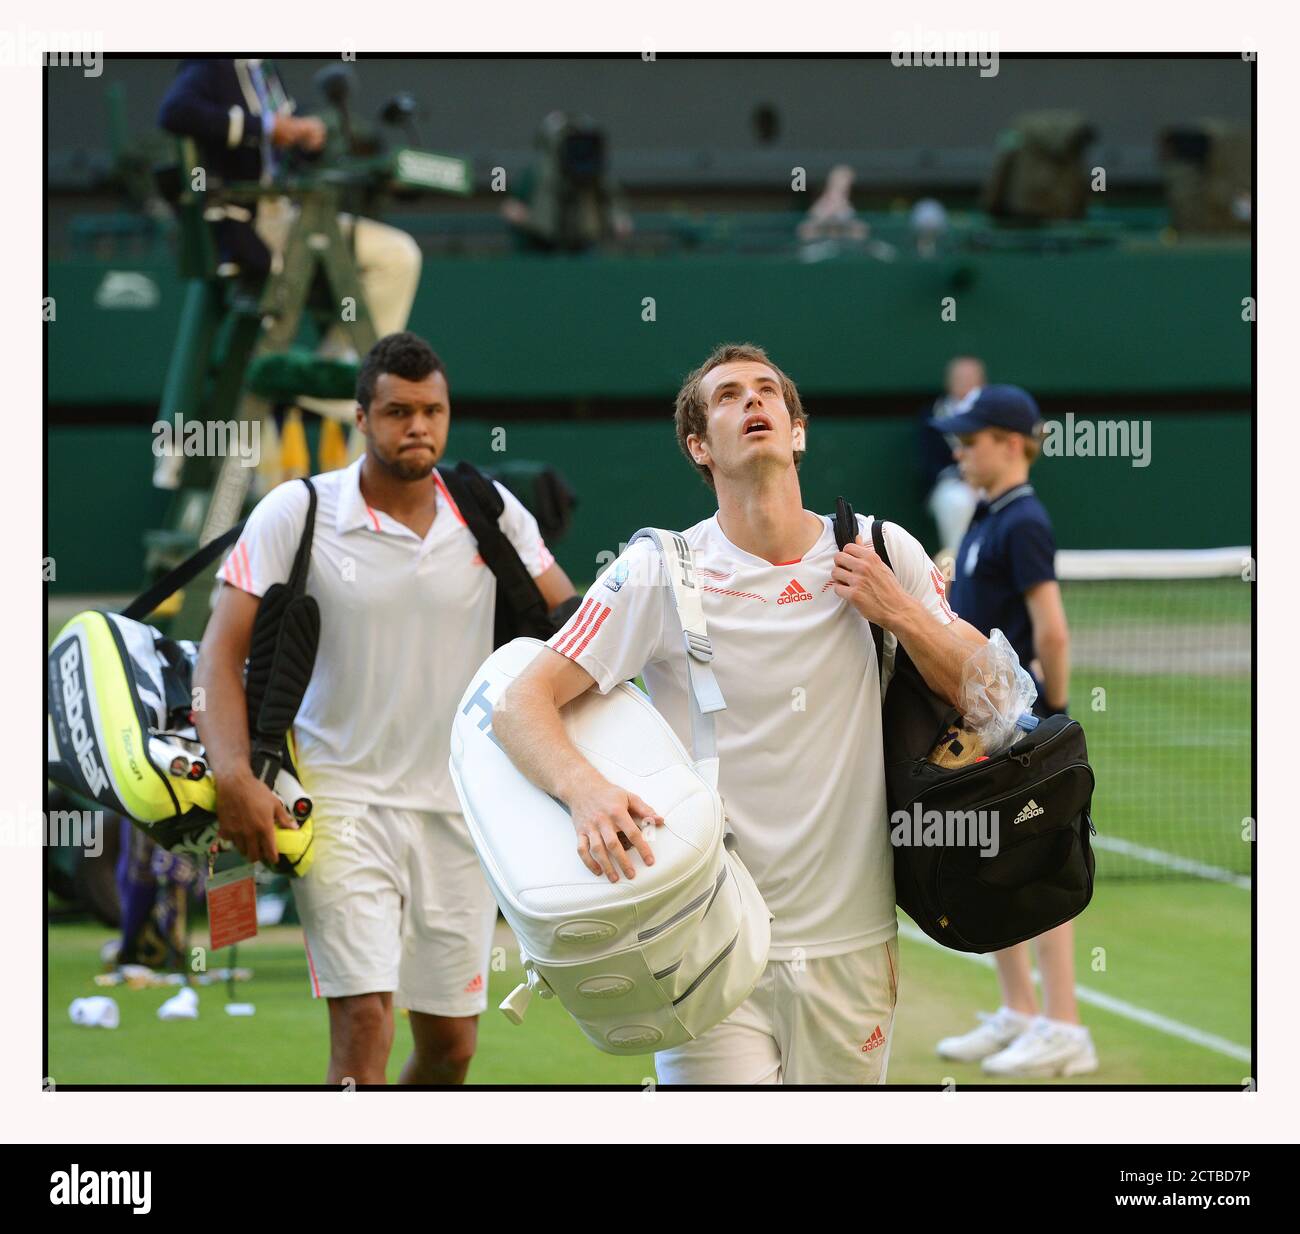 ANDY MURRAY LOOKS RELIEVED TO HAVE BEATEN JO-WILFRIED TSONGA IN THE MNS SEMI-FINAL. WIMBLEDON 2012. PICTURE : © MARK PAIN /ALAMY STOCK PHOTO Stock Photo